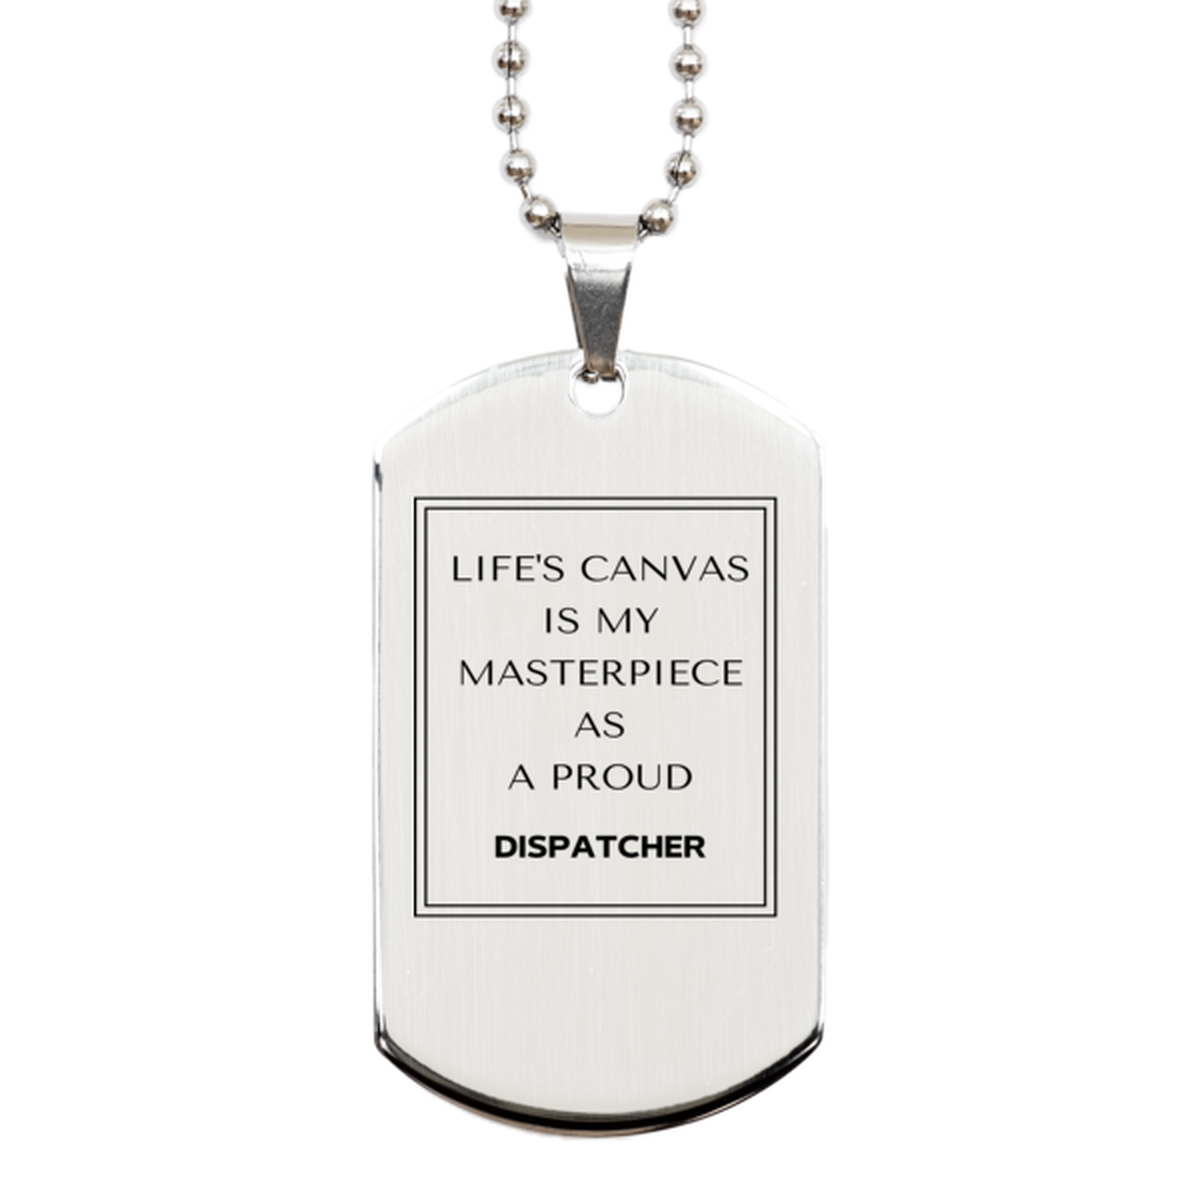 Proud Dispatcher Gifts, Life's canvas is my masterpiece, Epic Birthday Christmas Unique Silver Dog Tag For Dispatcher, Coworkers, Men, Women, Friends